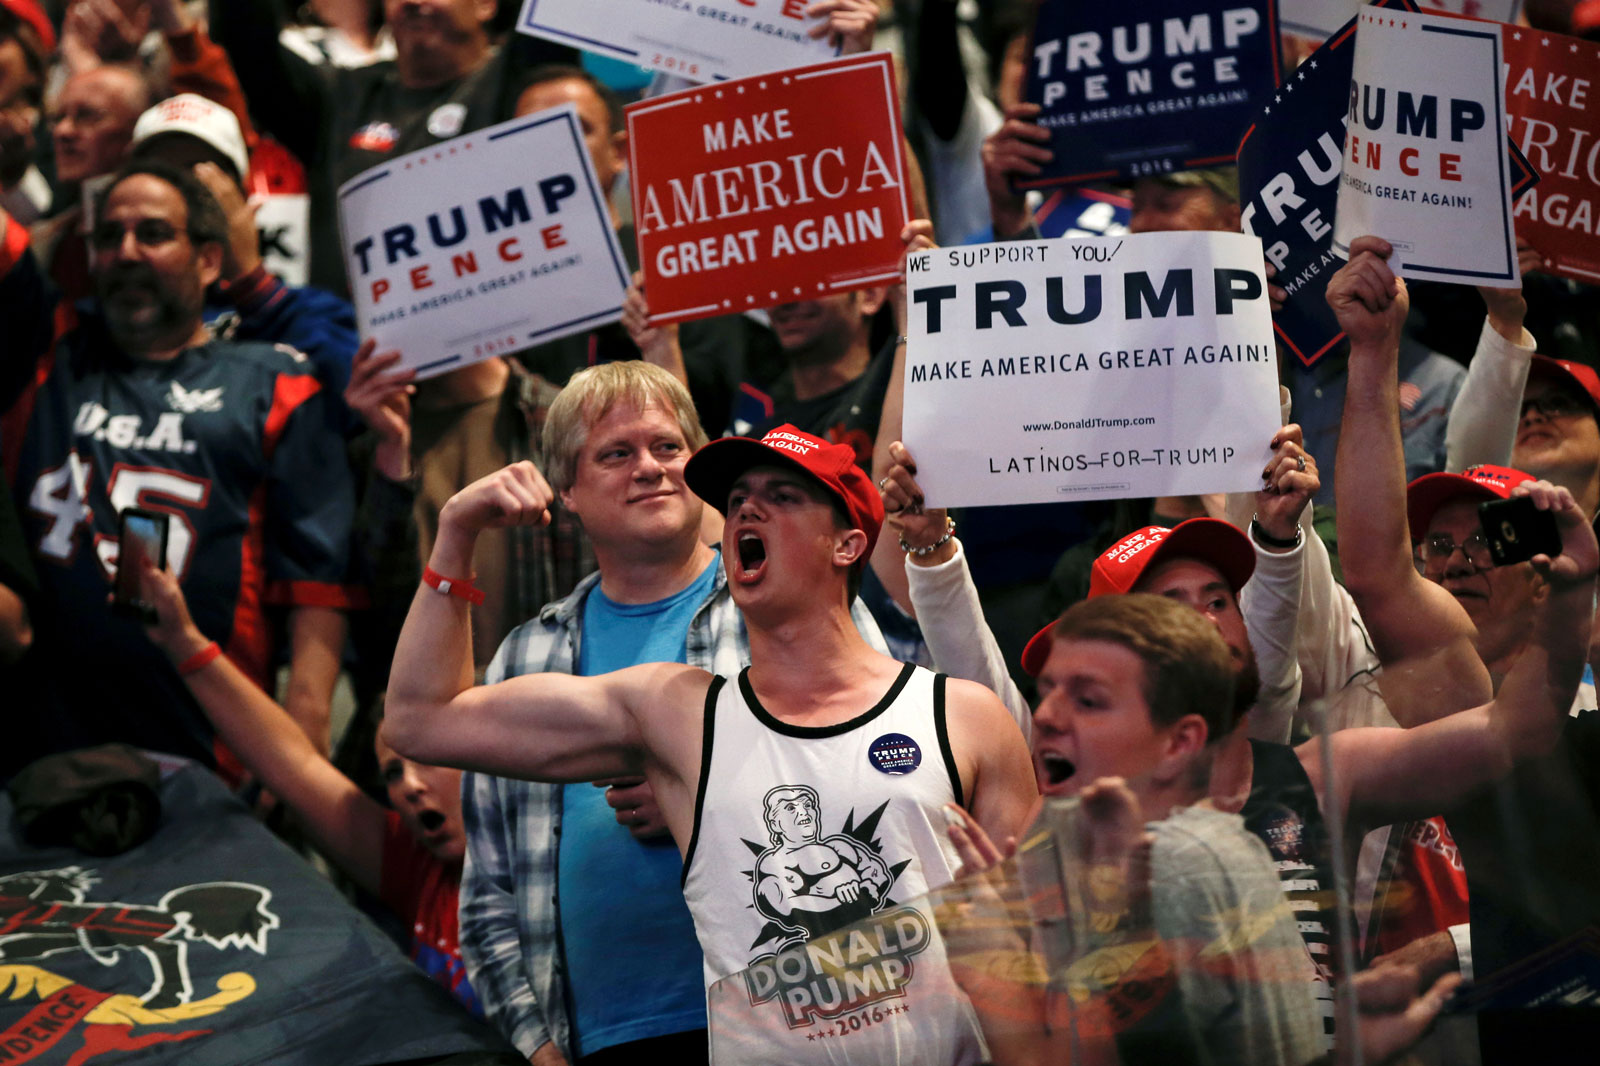 Donald Trump supporters at a campaign rally, Wilkes-Barre, Pennsylvania, October 10, 2016